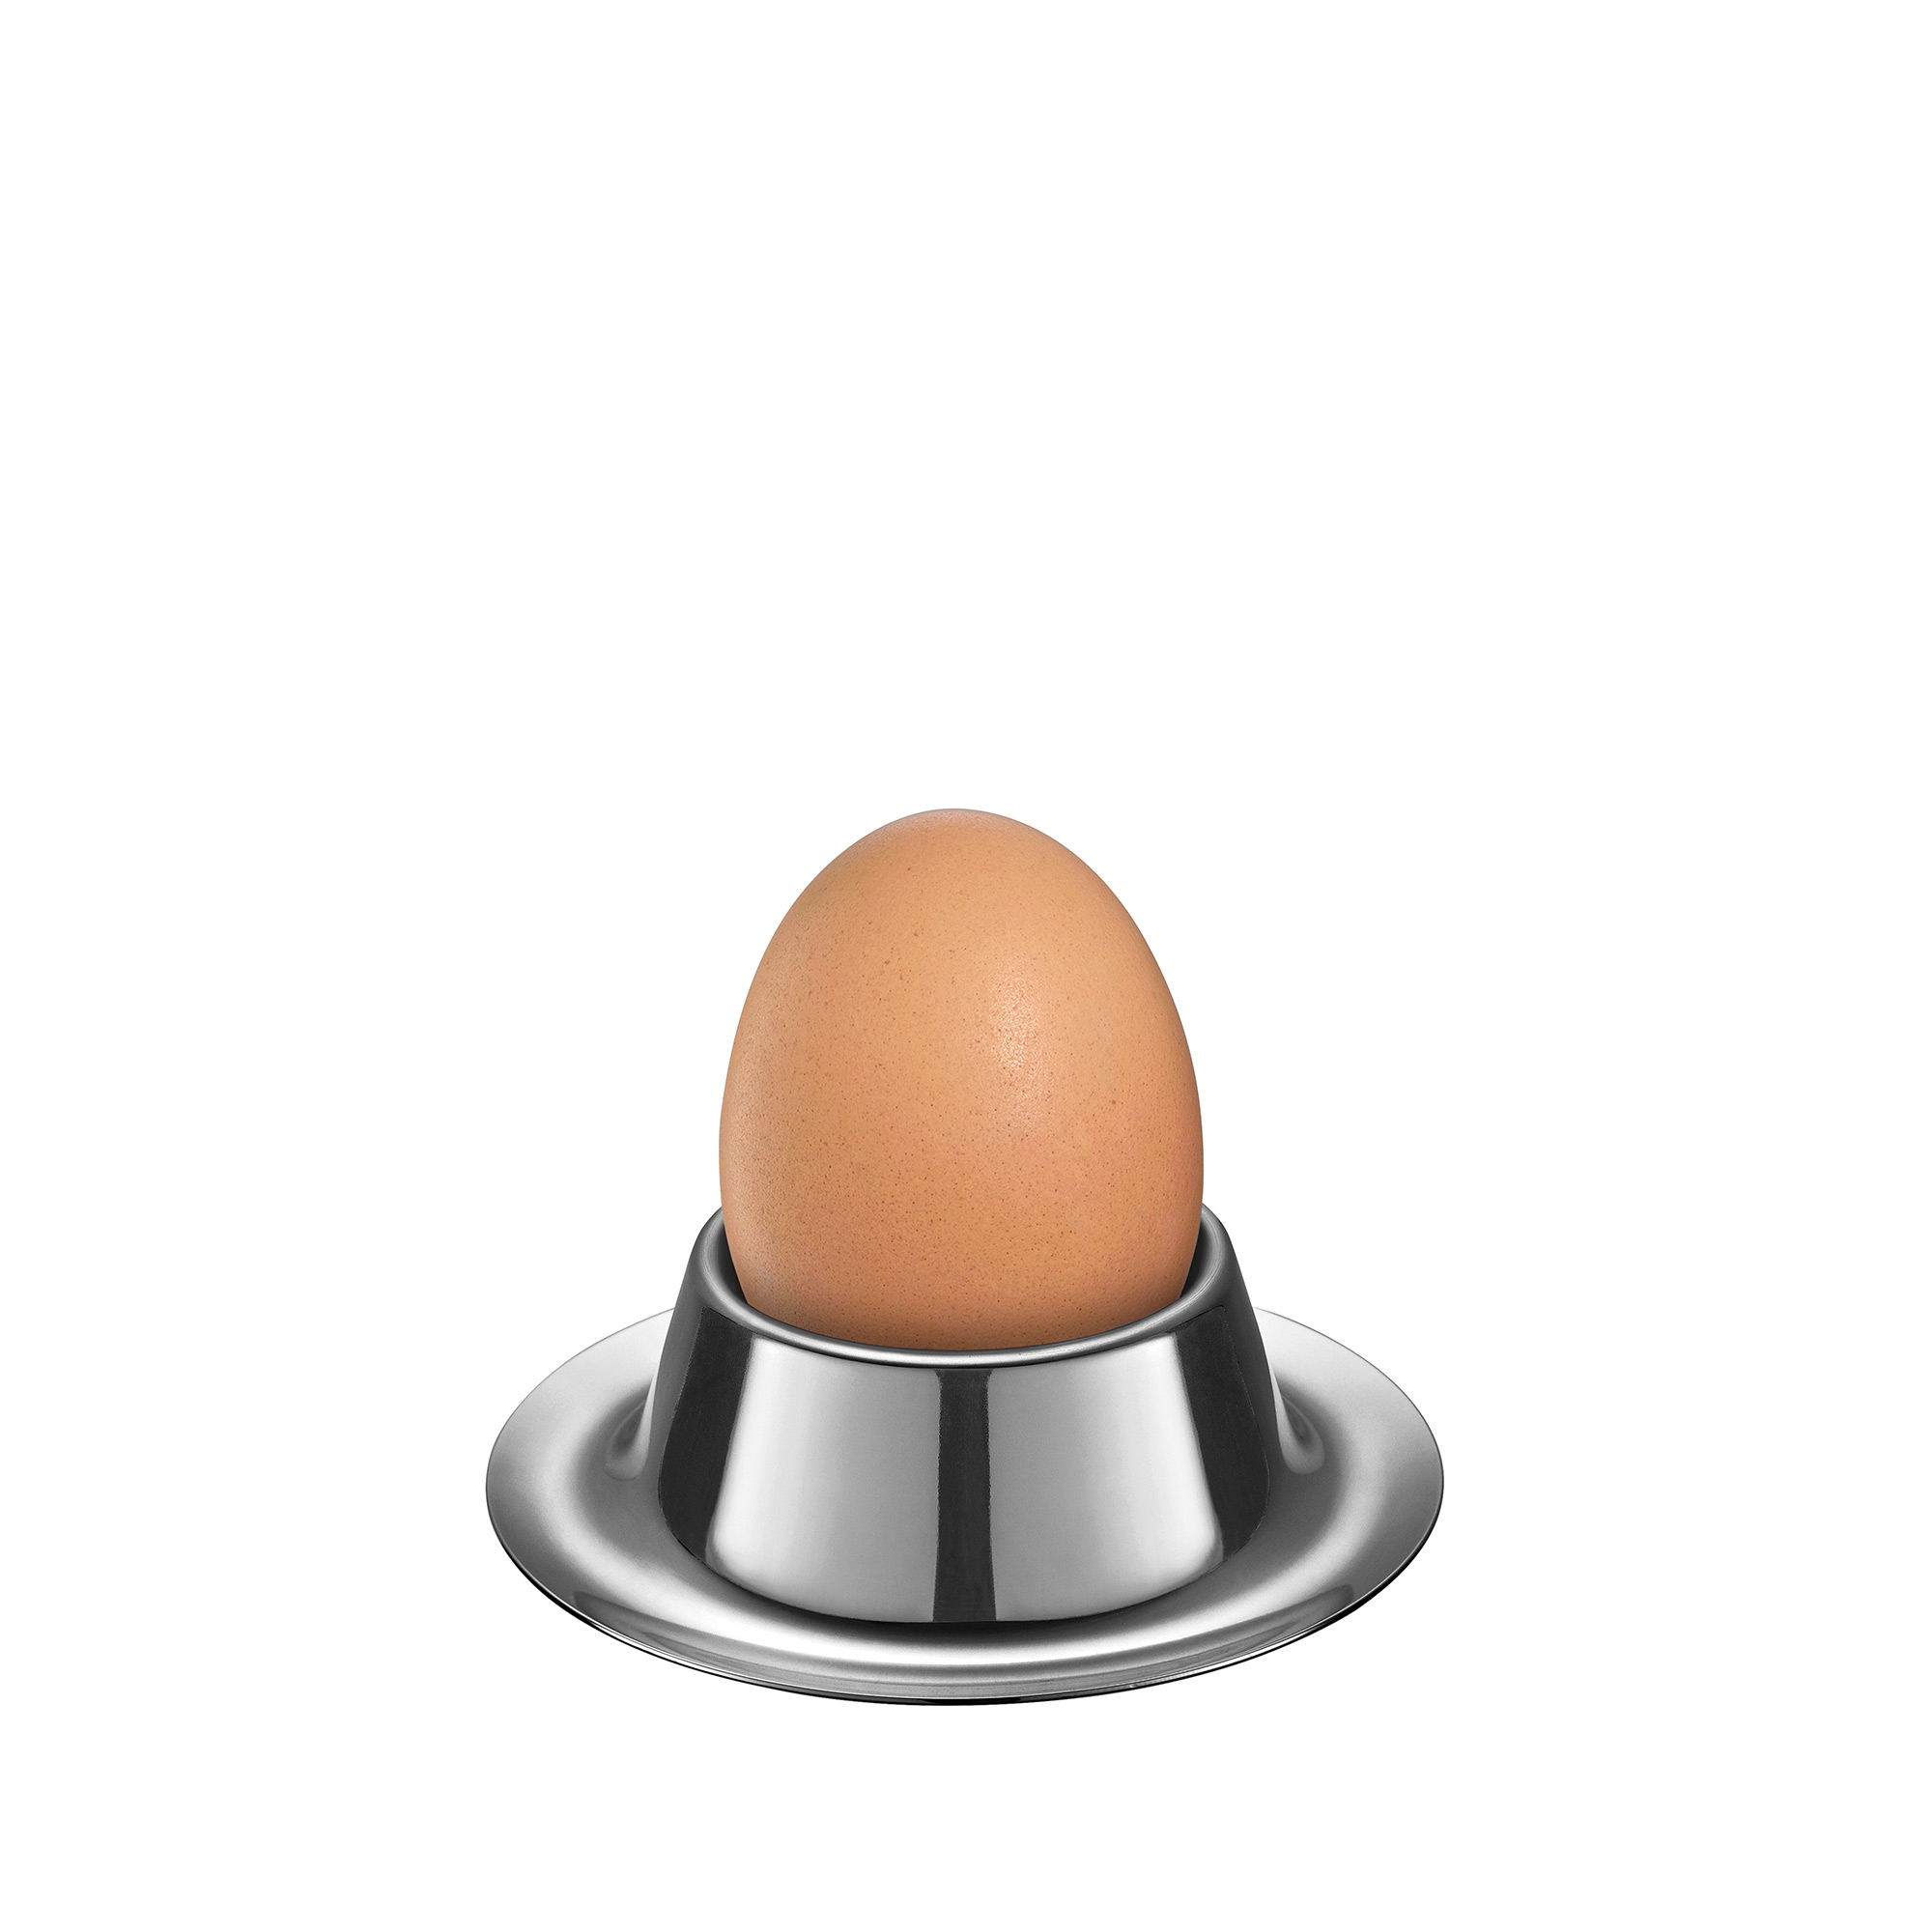 Cilio - egg cup set of 2 - UOVO